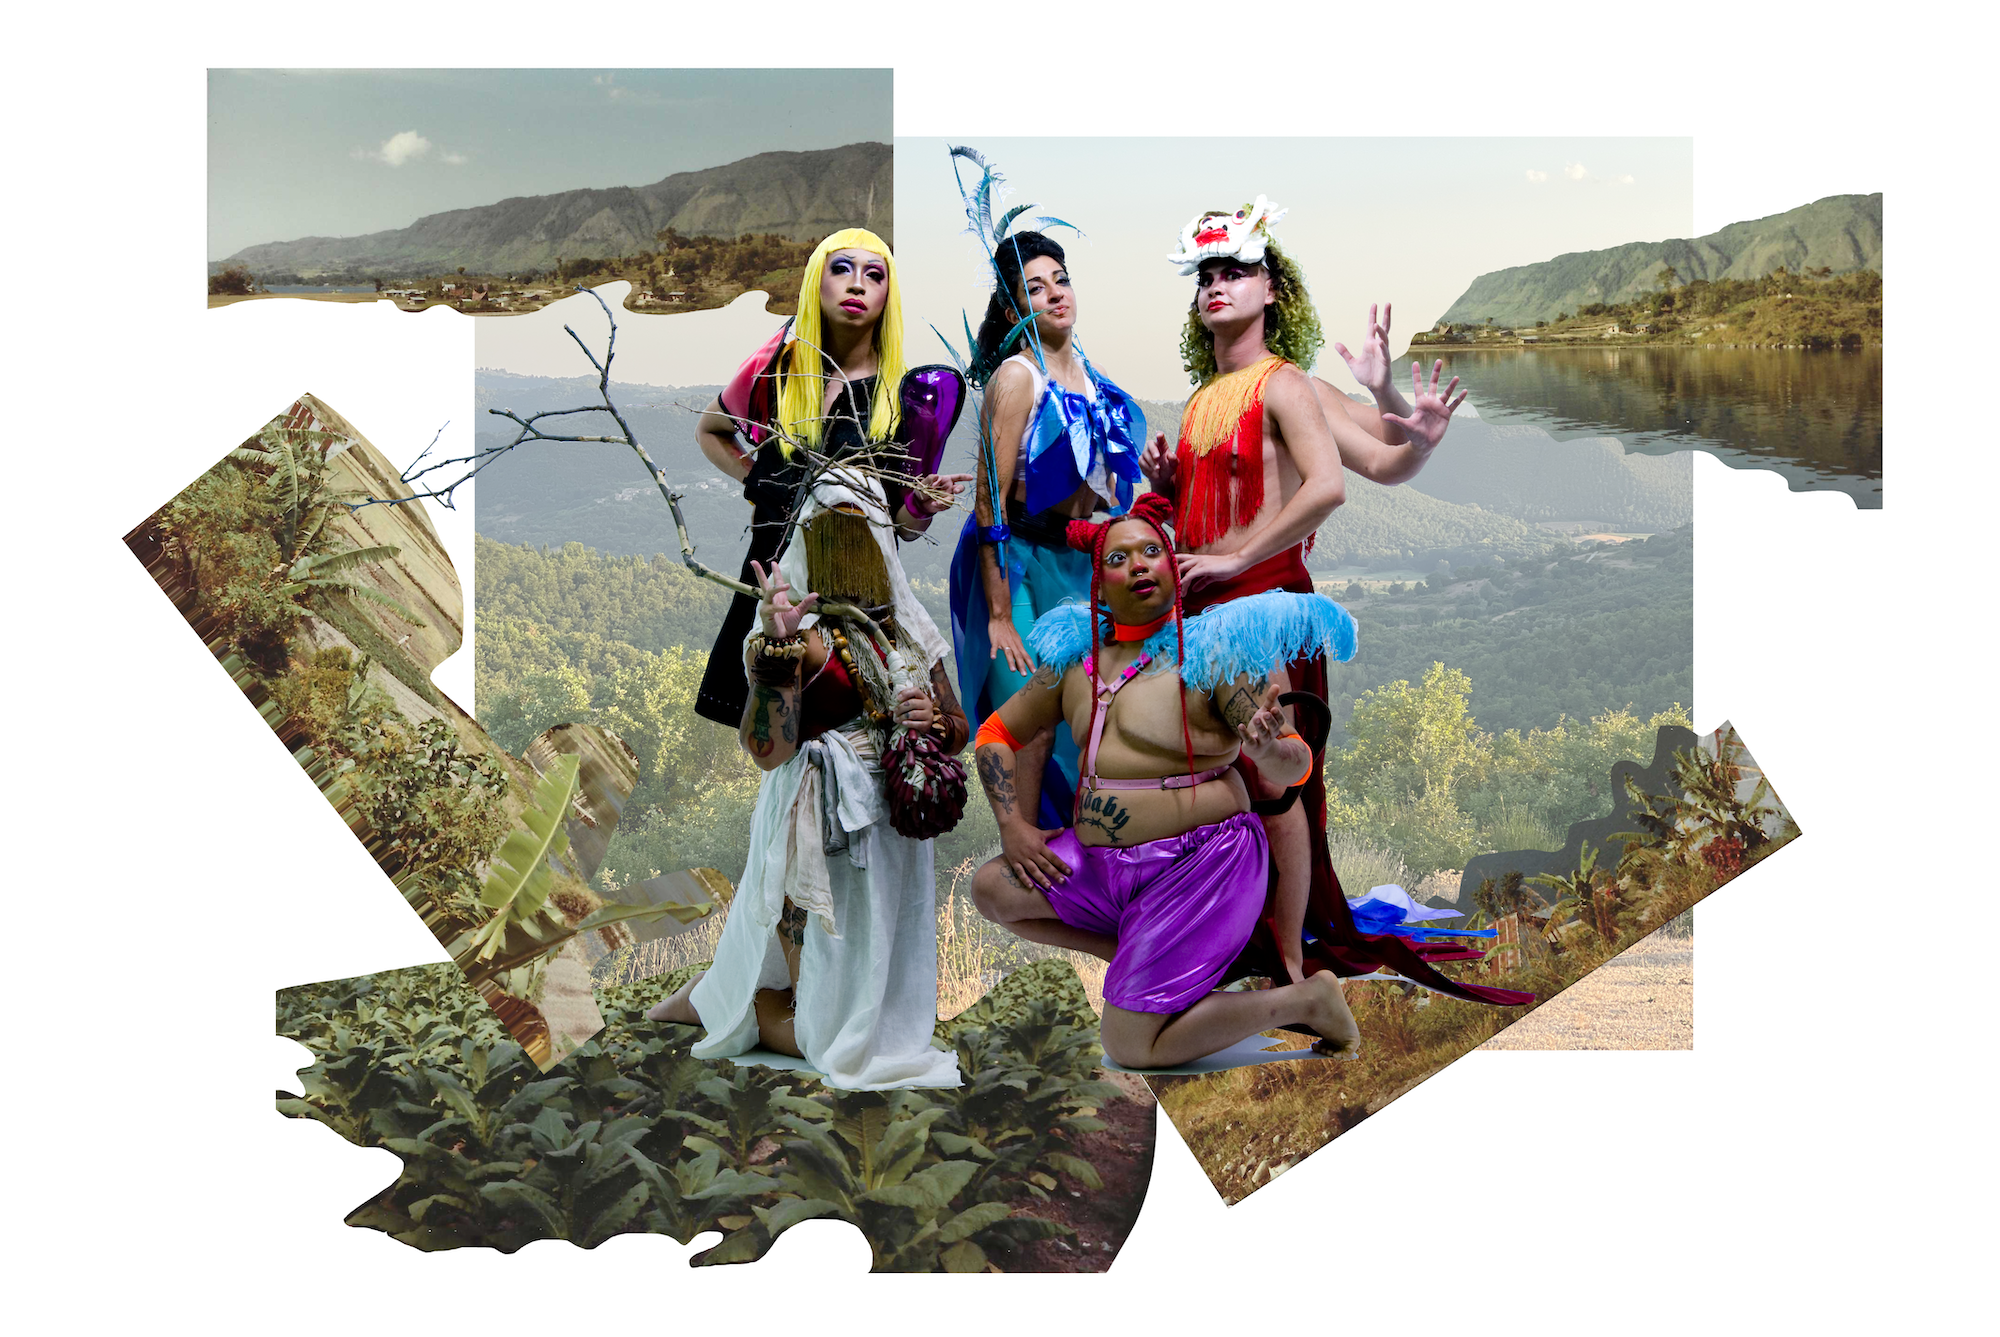 Five colorful deities pose against a collage of olive green landscape photos clipped and arranged to overlap. One deity with long yellow hair and bangs wears purple, pink and black dress and purple and pink makeup. To her right, a deity in blue with tall blue peacock feathers has blue eye make up and long hair pouffed above her forehead. Next to her, a deity with four raised arms wears red fringe, red lipstick, green curly hair, and a mask of a white spirit’s face with fangs and teeth. Kneeling in front of her is a deity with puffy blue feathers, a pink harness, shiny purple bloomers, red braids in buns, orange arm bands and colorful makeup. Next to them another deity in creme and taupe fabrics kneels, their face obscured by golden bead fringe and holds a branch with wooden beads.